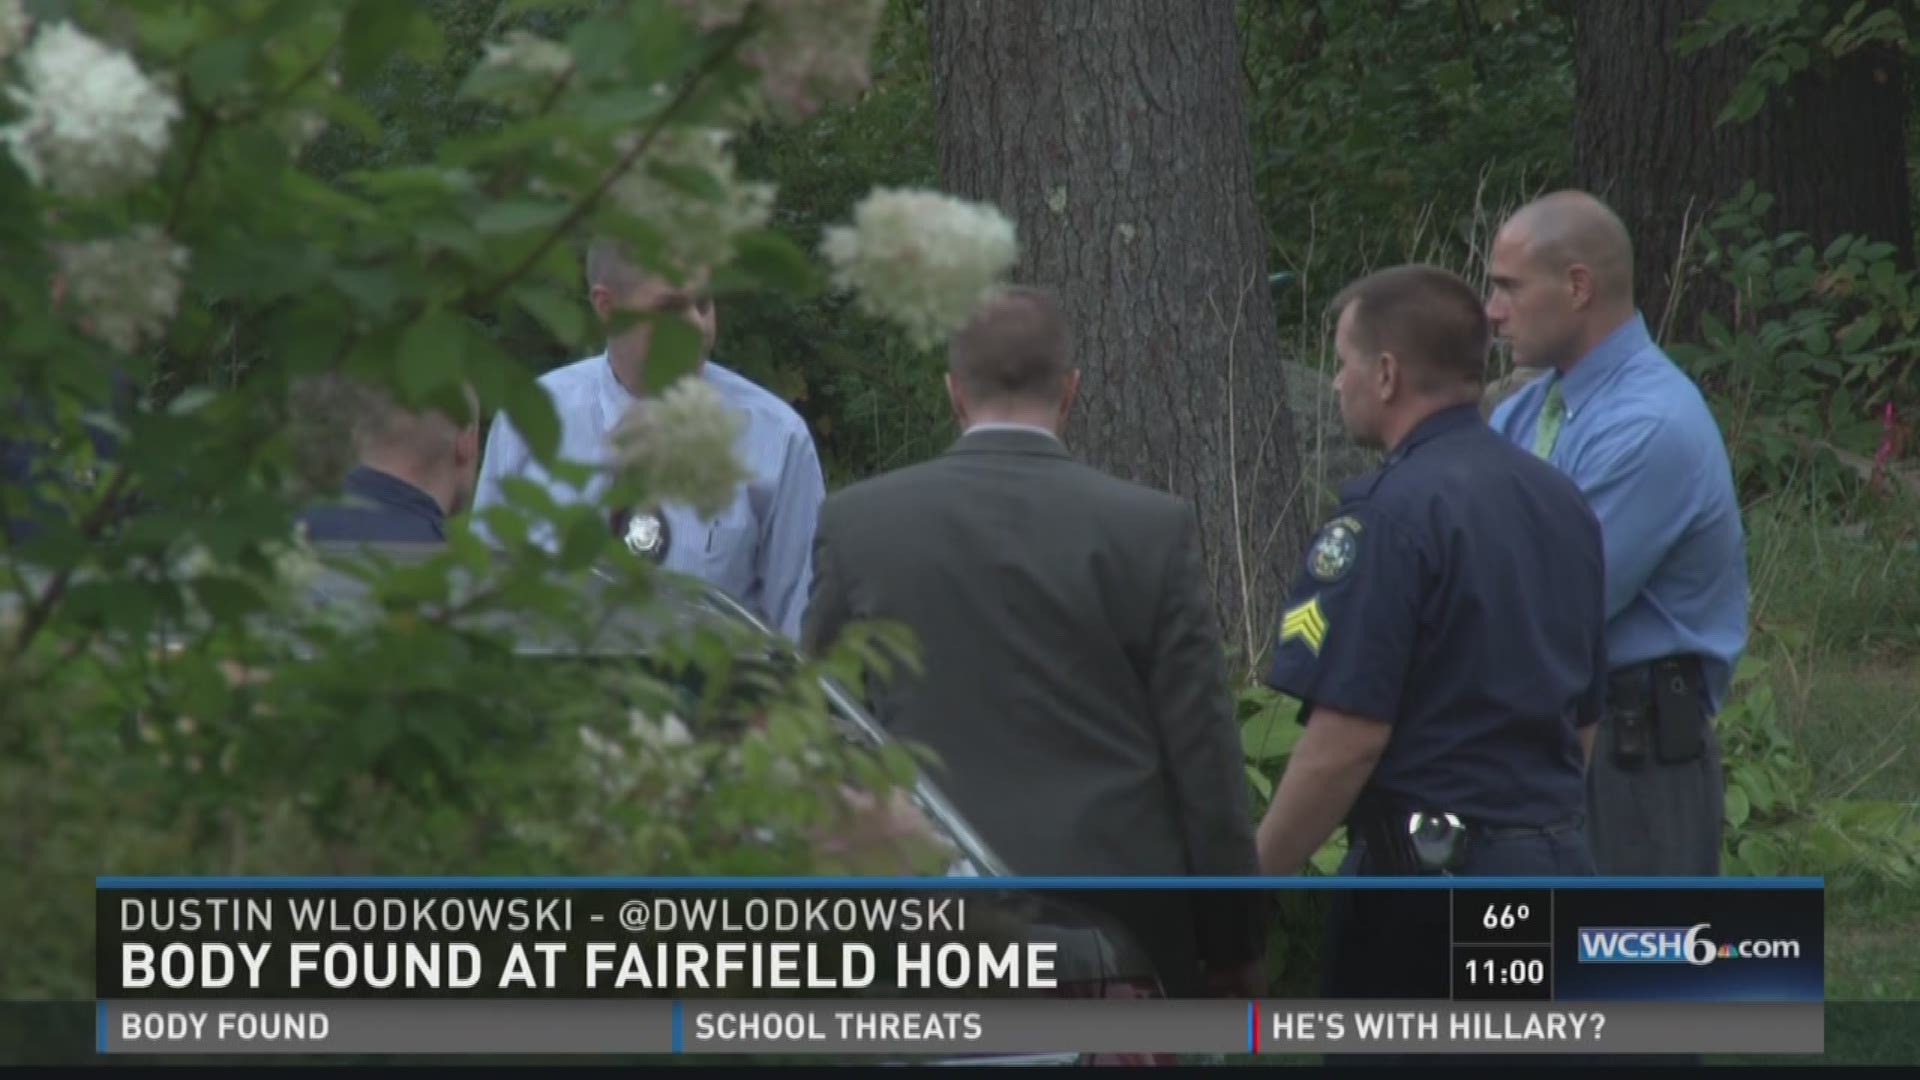 Body found at Fairfield home